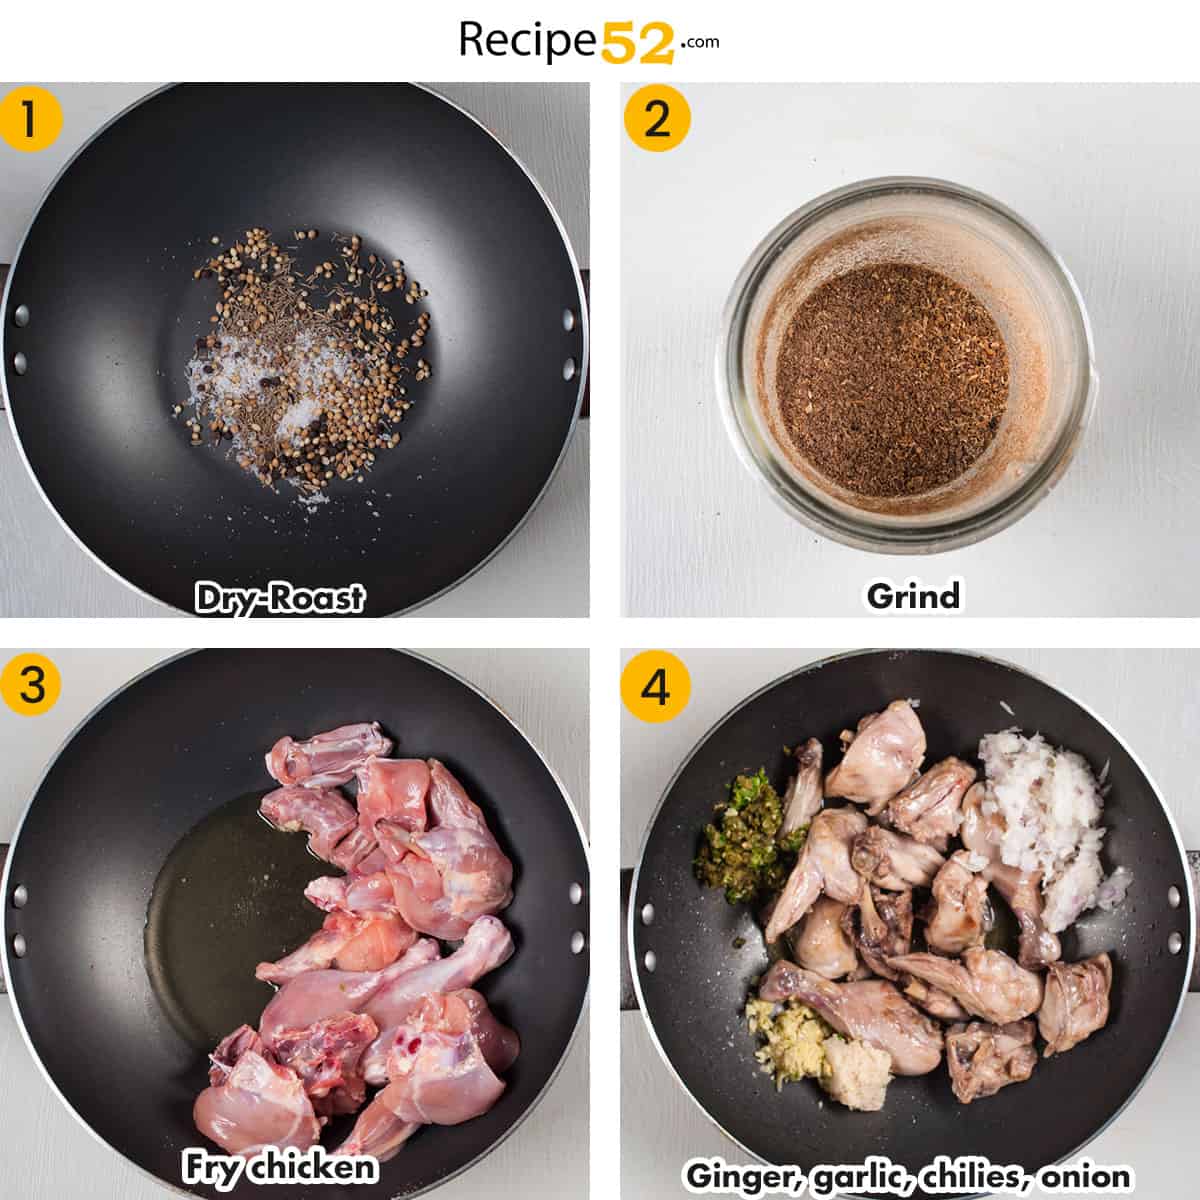 A collage of steps to prepare chicken and spice mix.